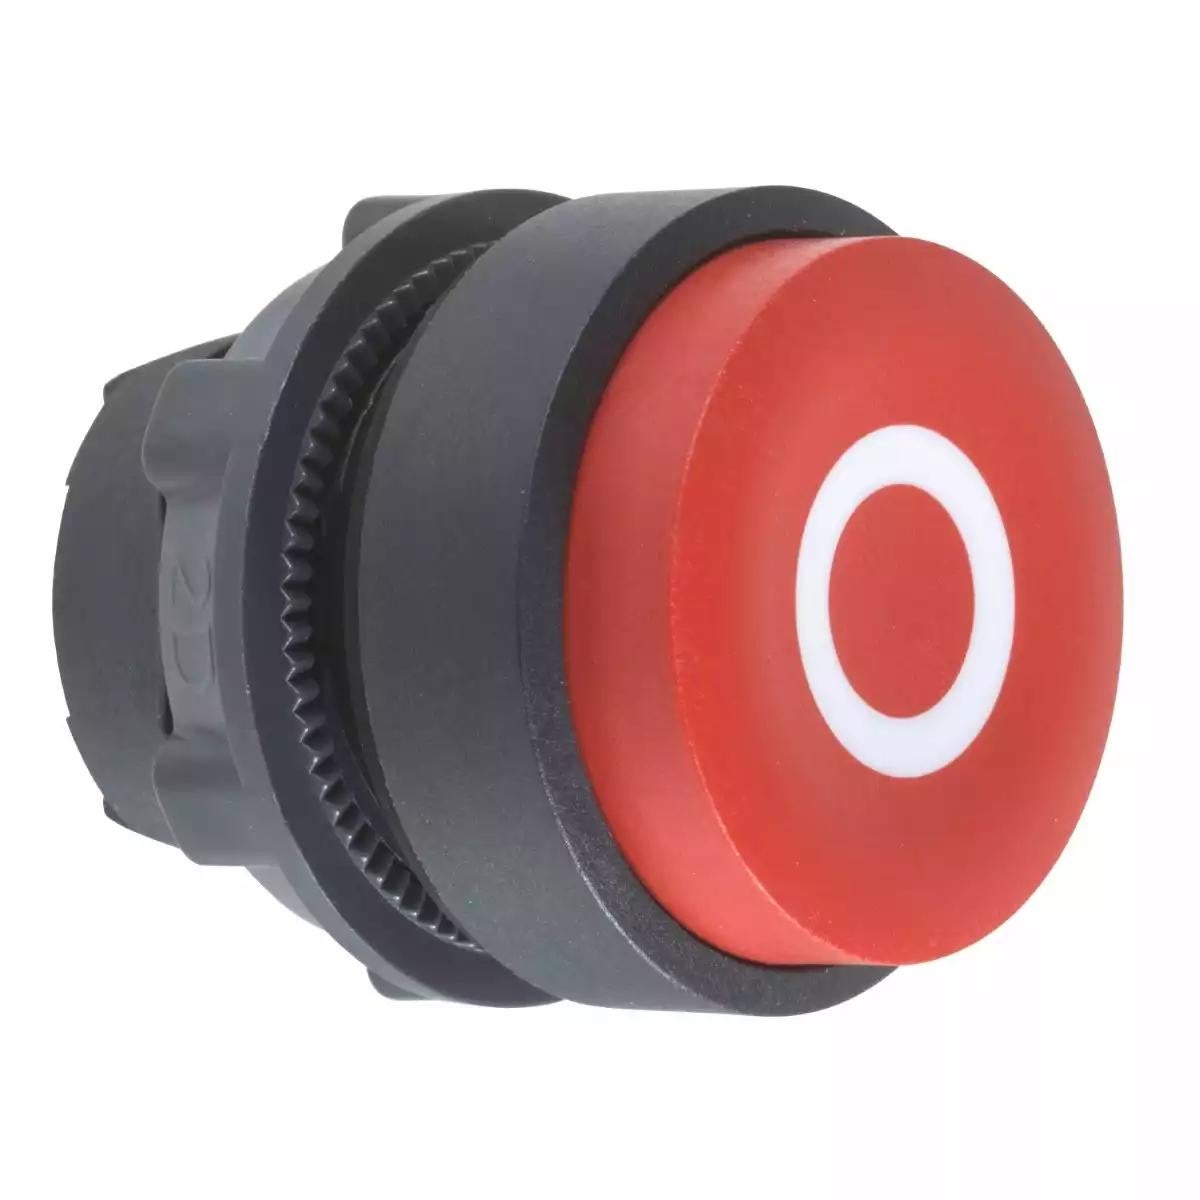 Projecting push button head 40mm, Harmony XB5, plastic, red, 22mm, spring return, marked O